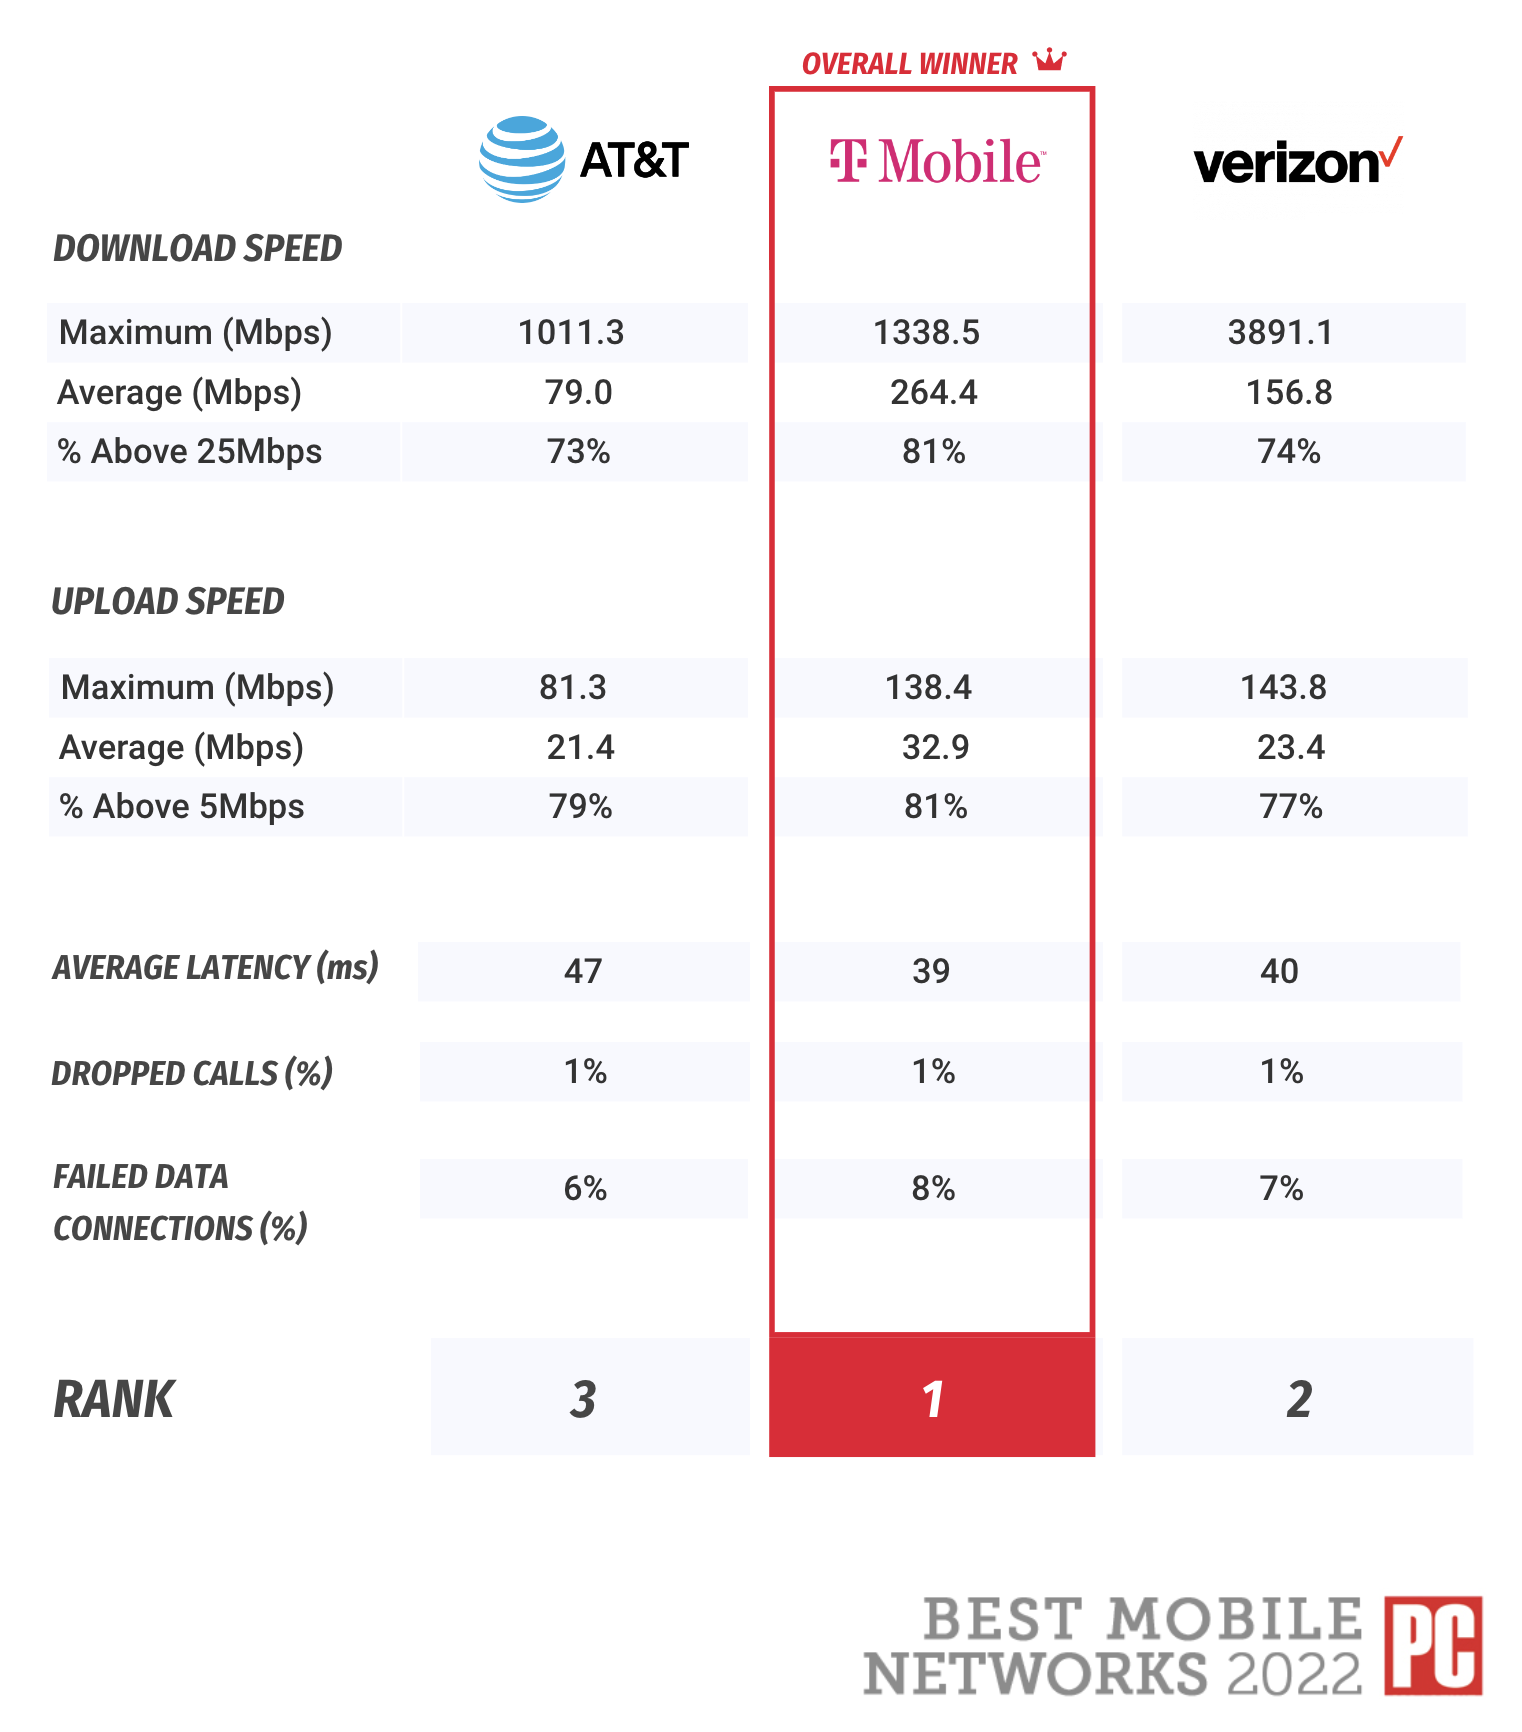 General PCMag results for Best Mobile Networks 2022